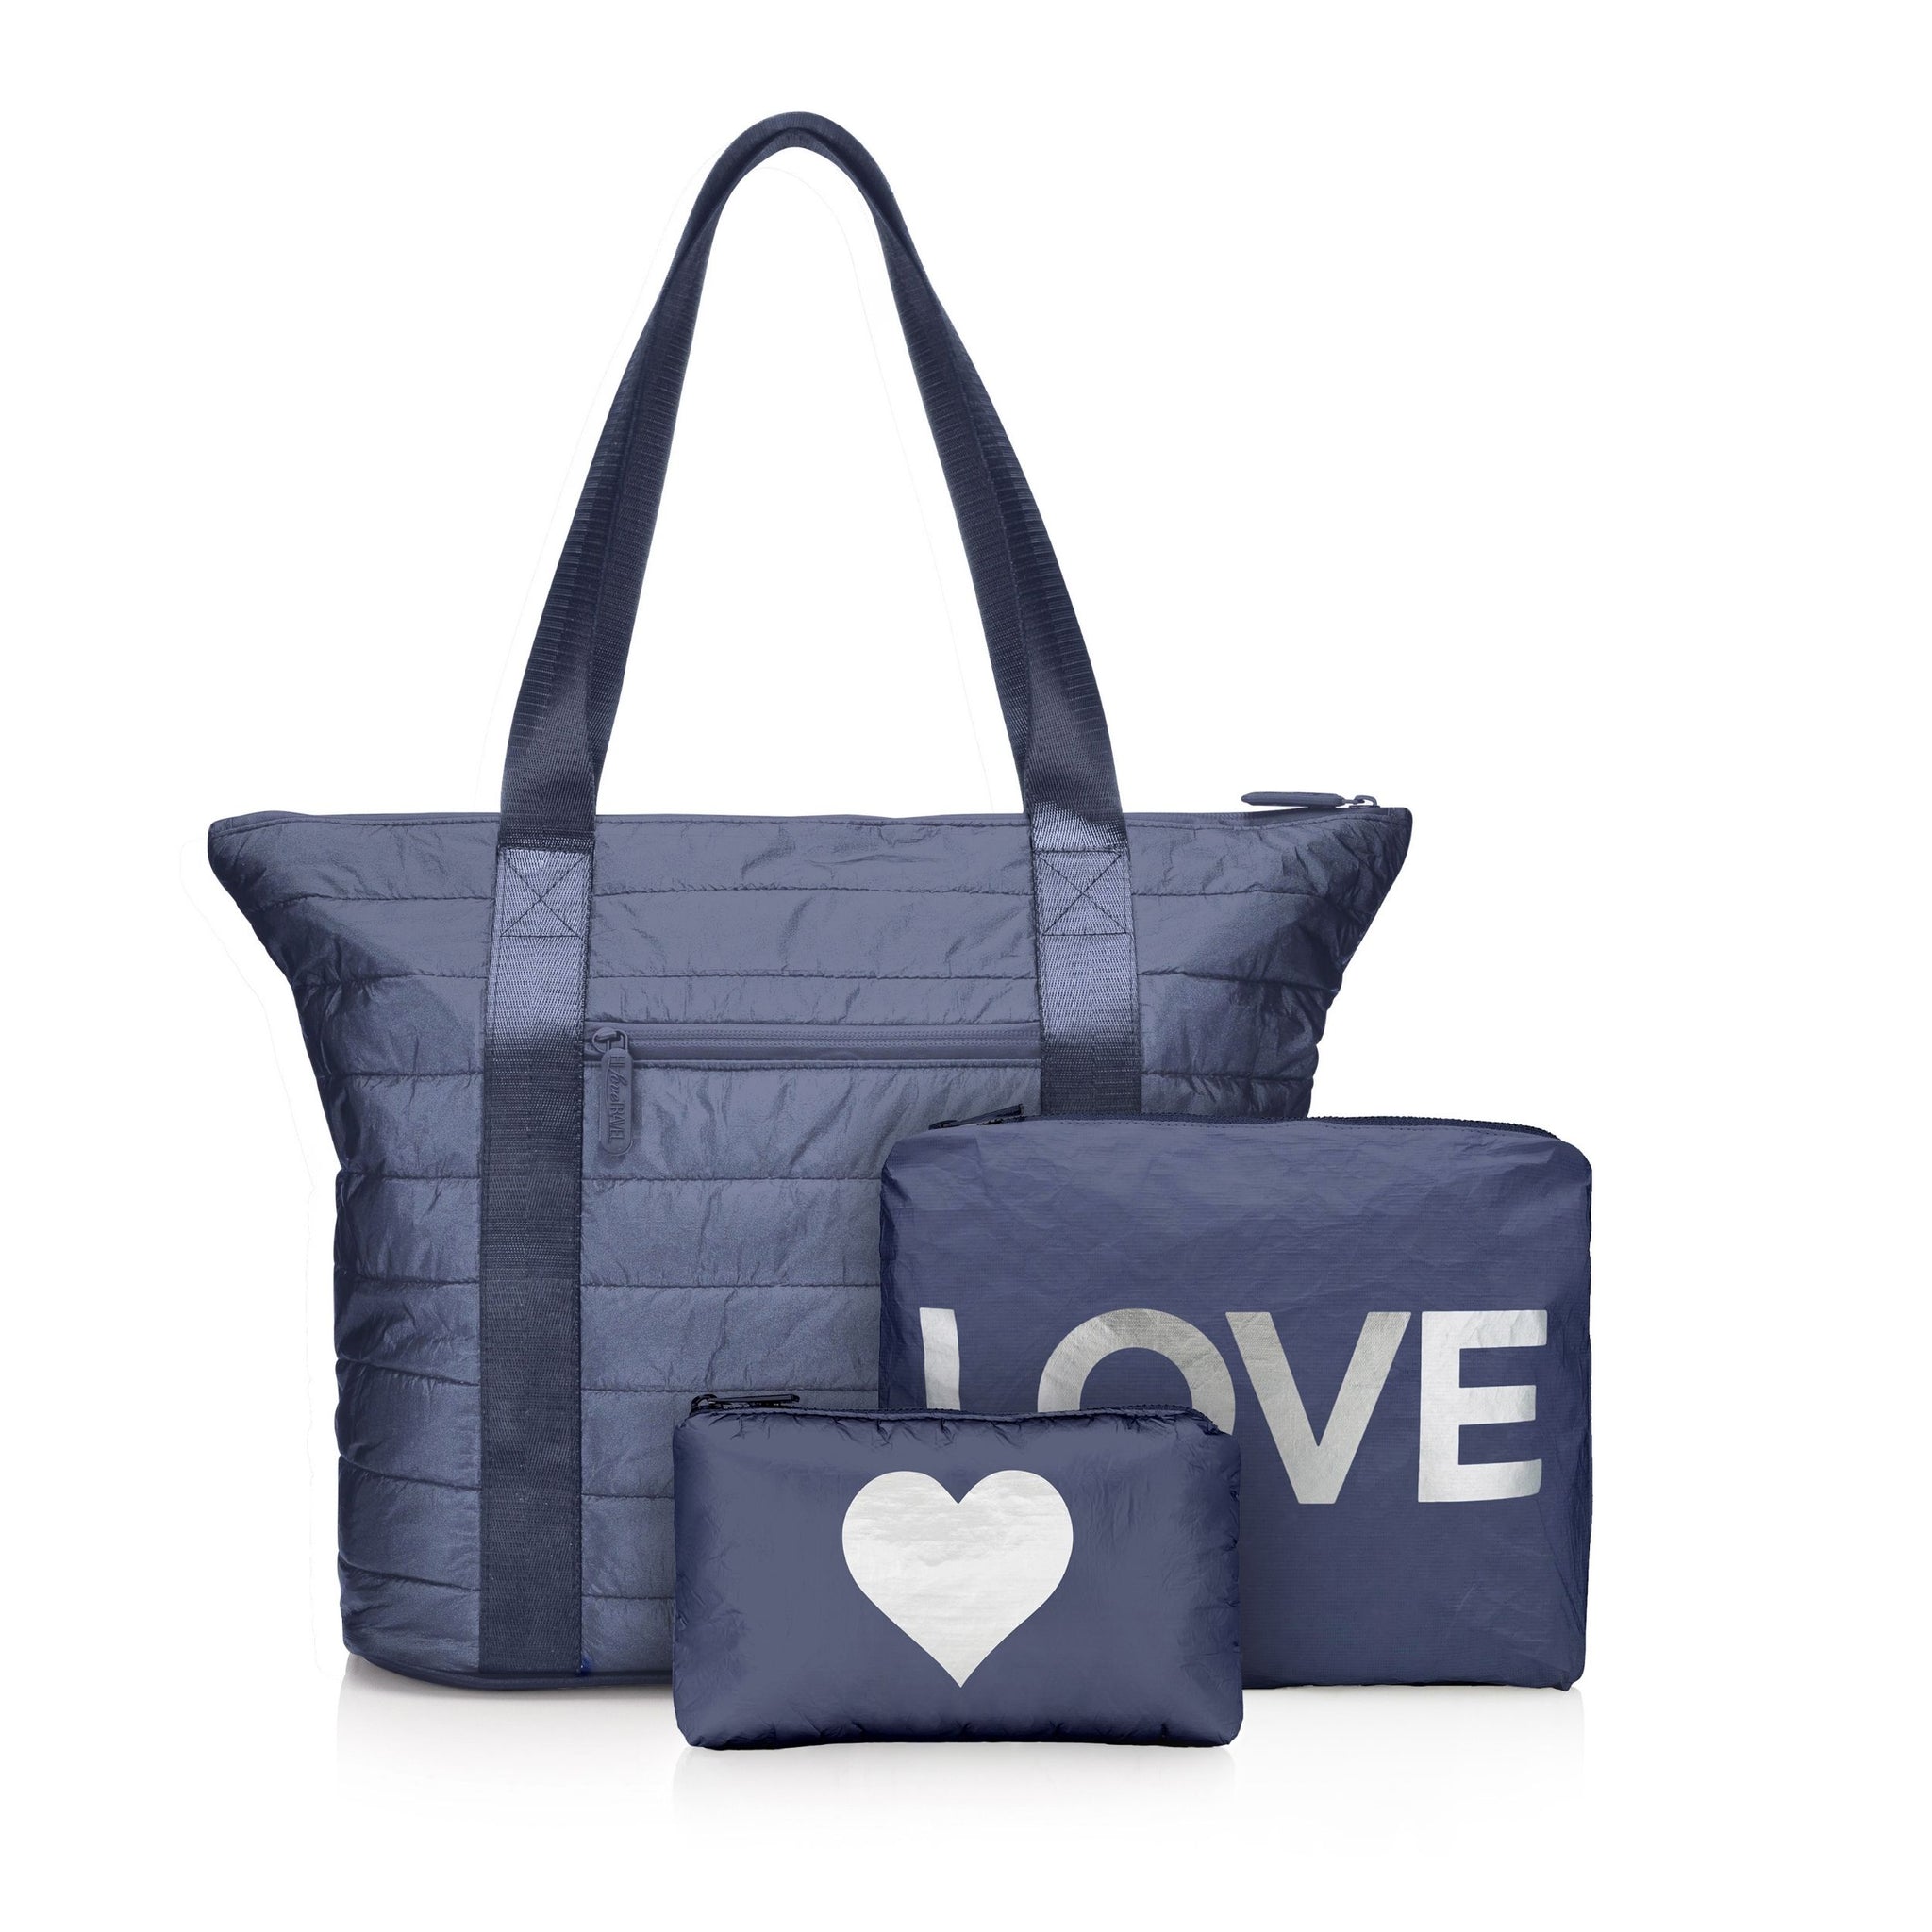 Set of Three Travel Packs - Everyday Tote Set in Shimmer Navy